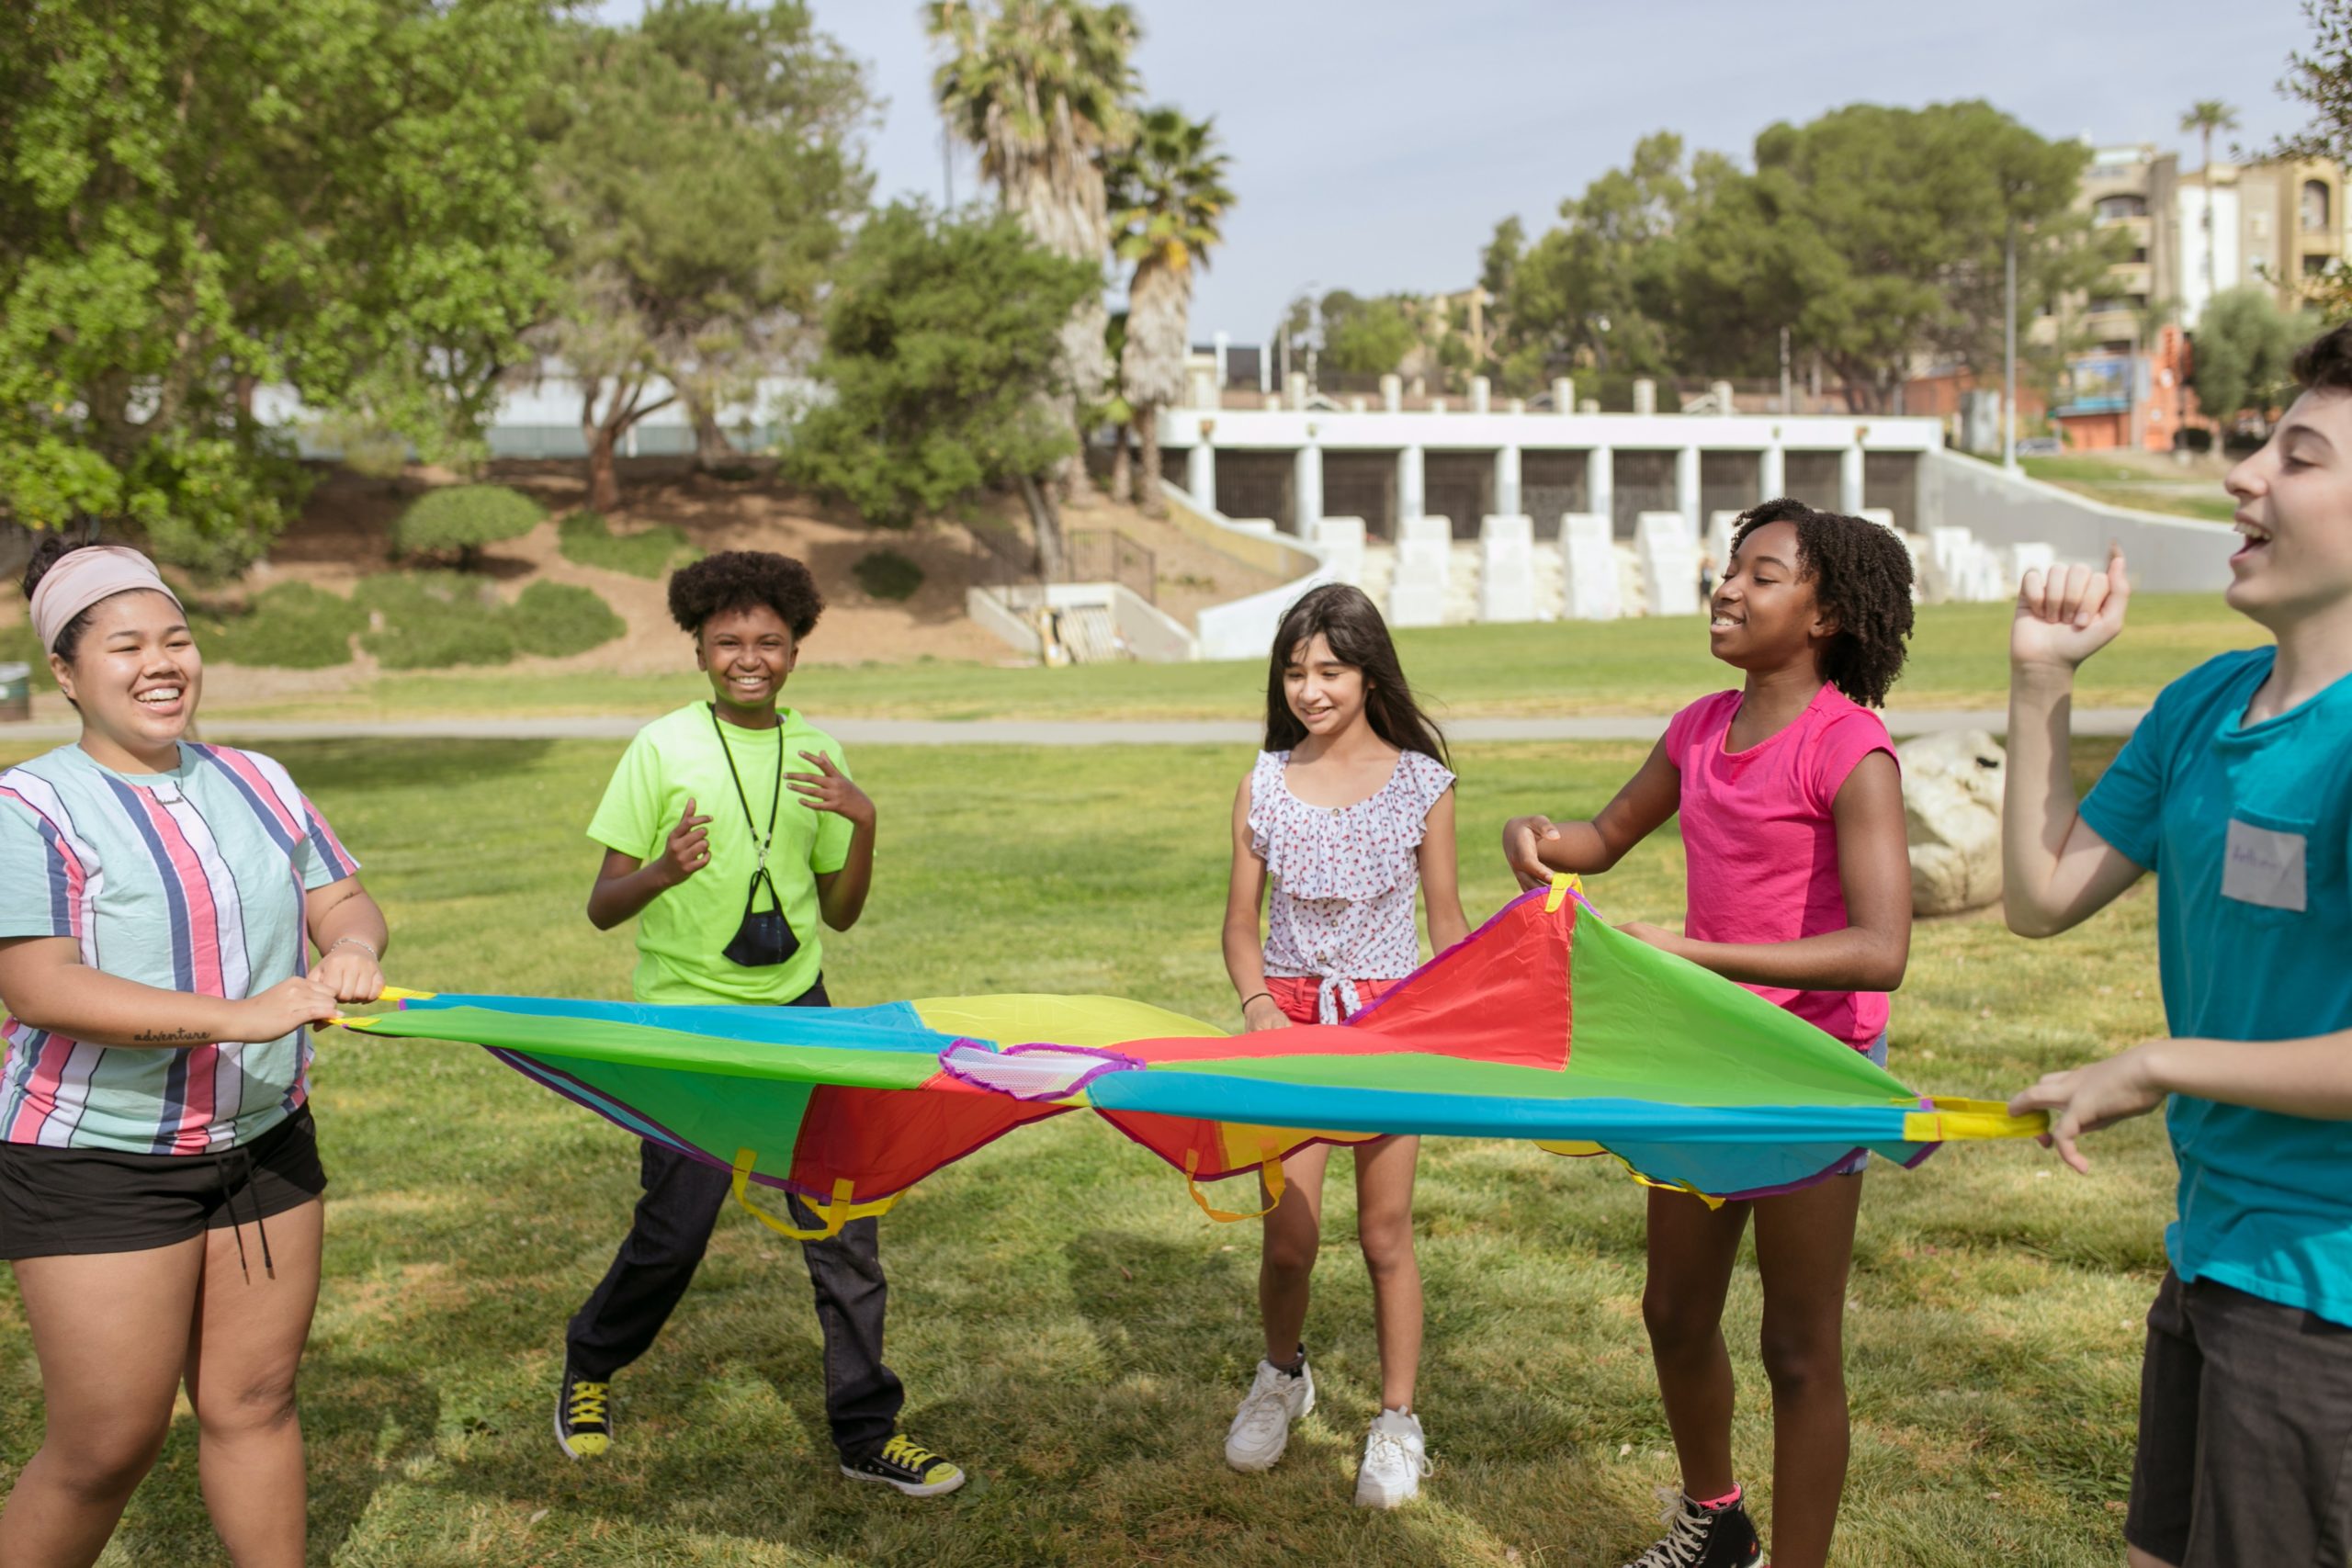 Middle school students play a game with a parachute outside.